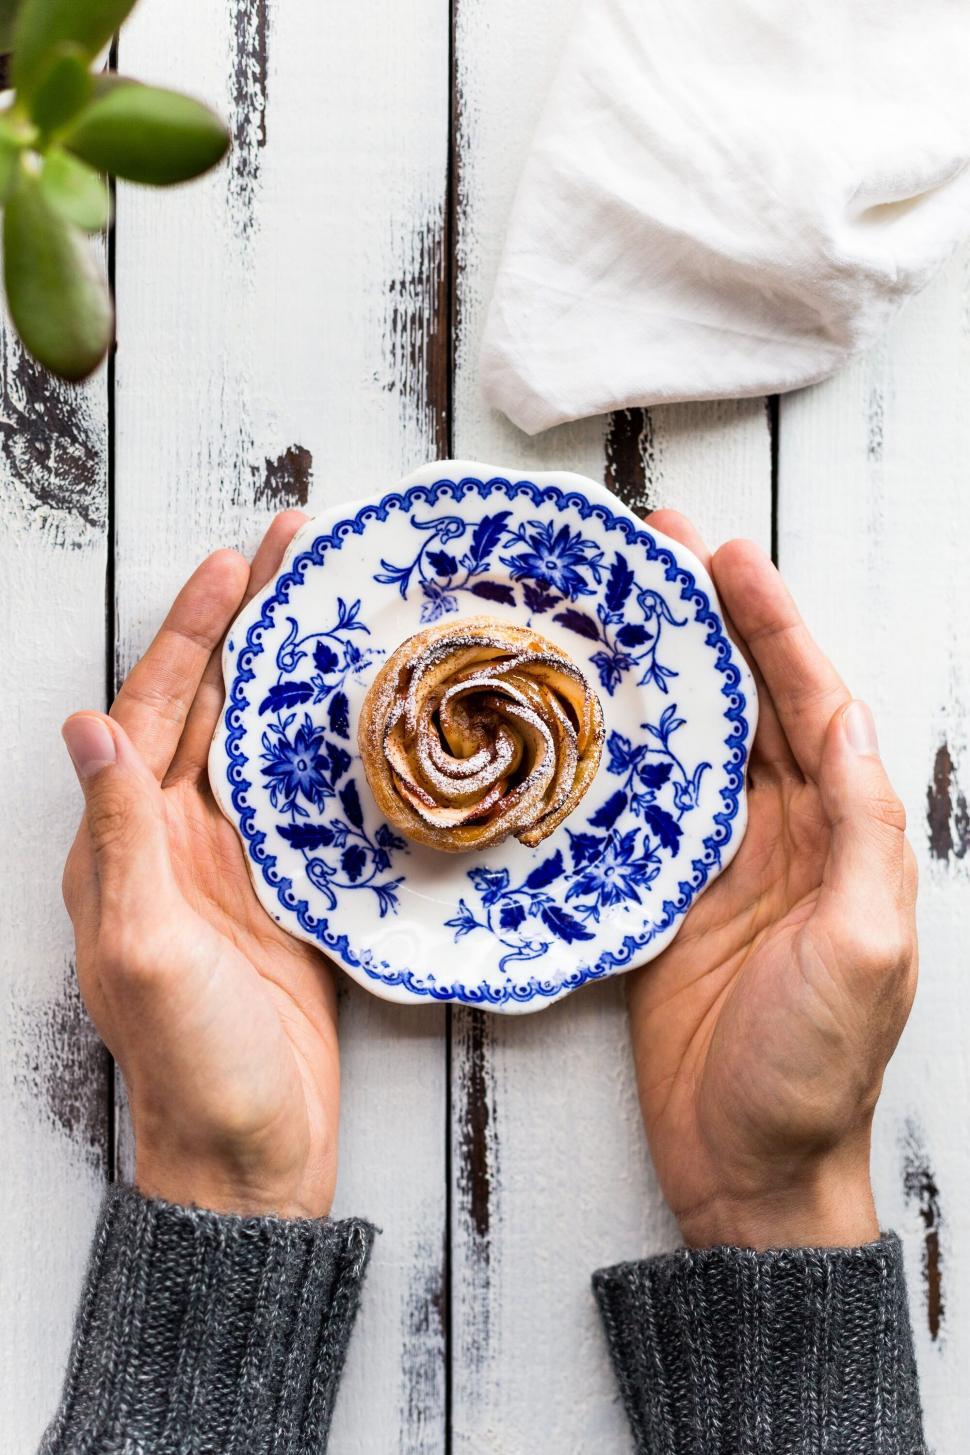 Free Image of Hand holding cinnamon roll on decorative plate 